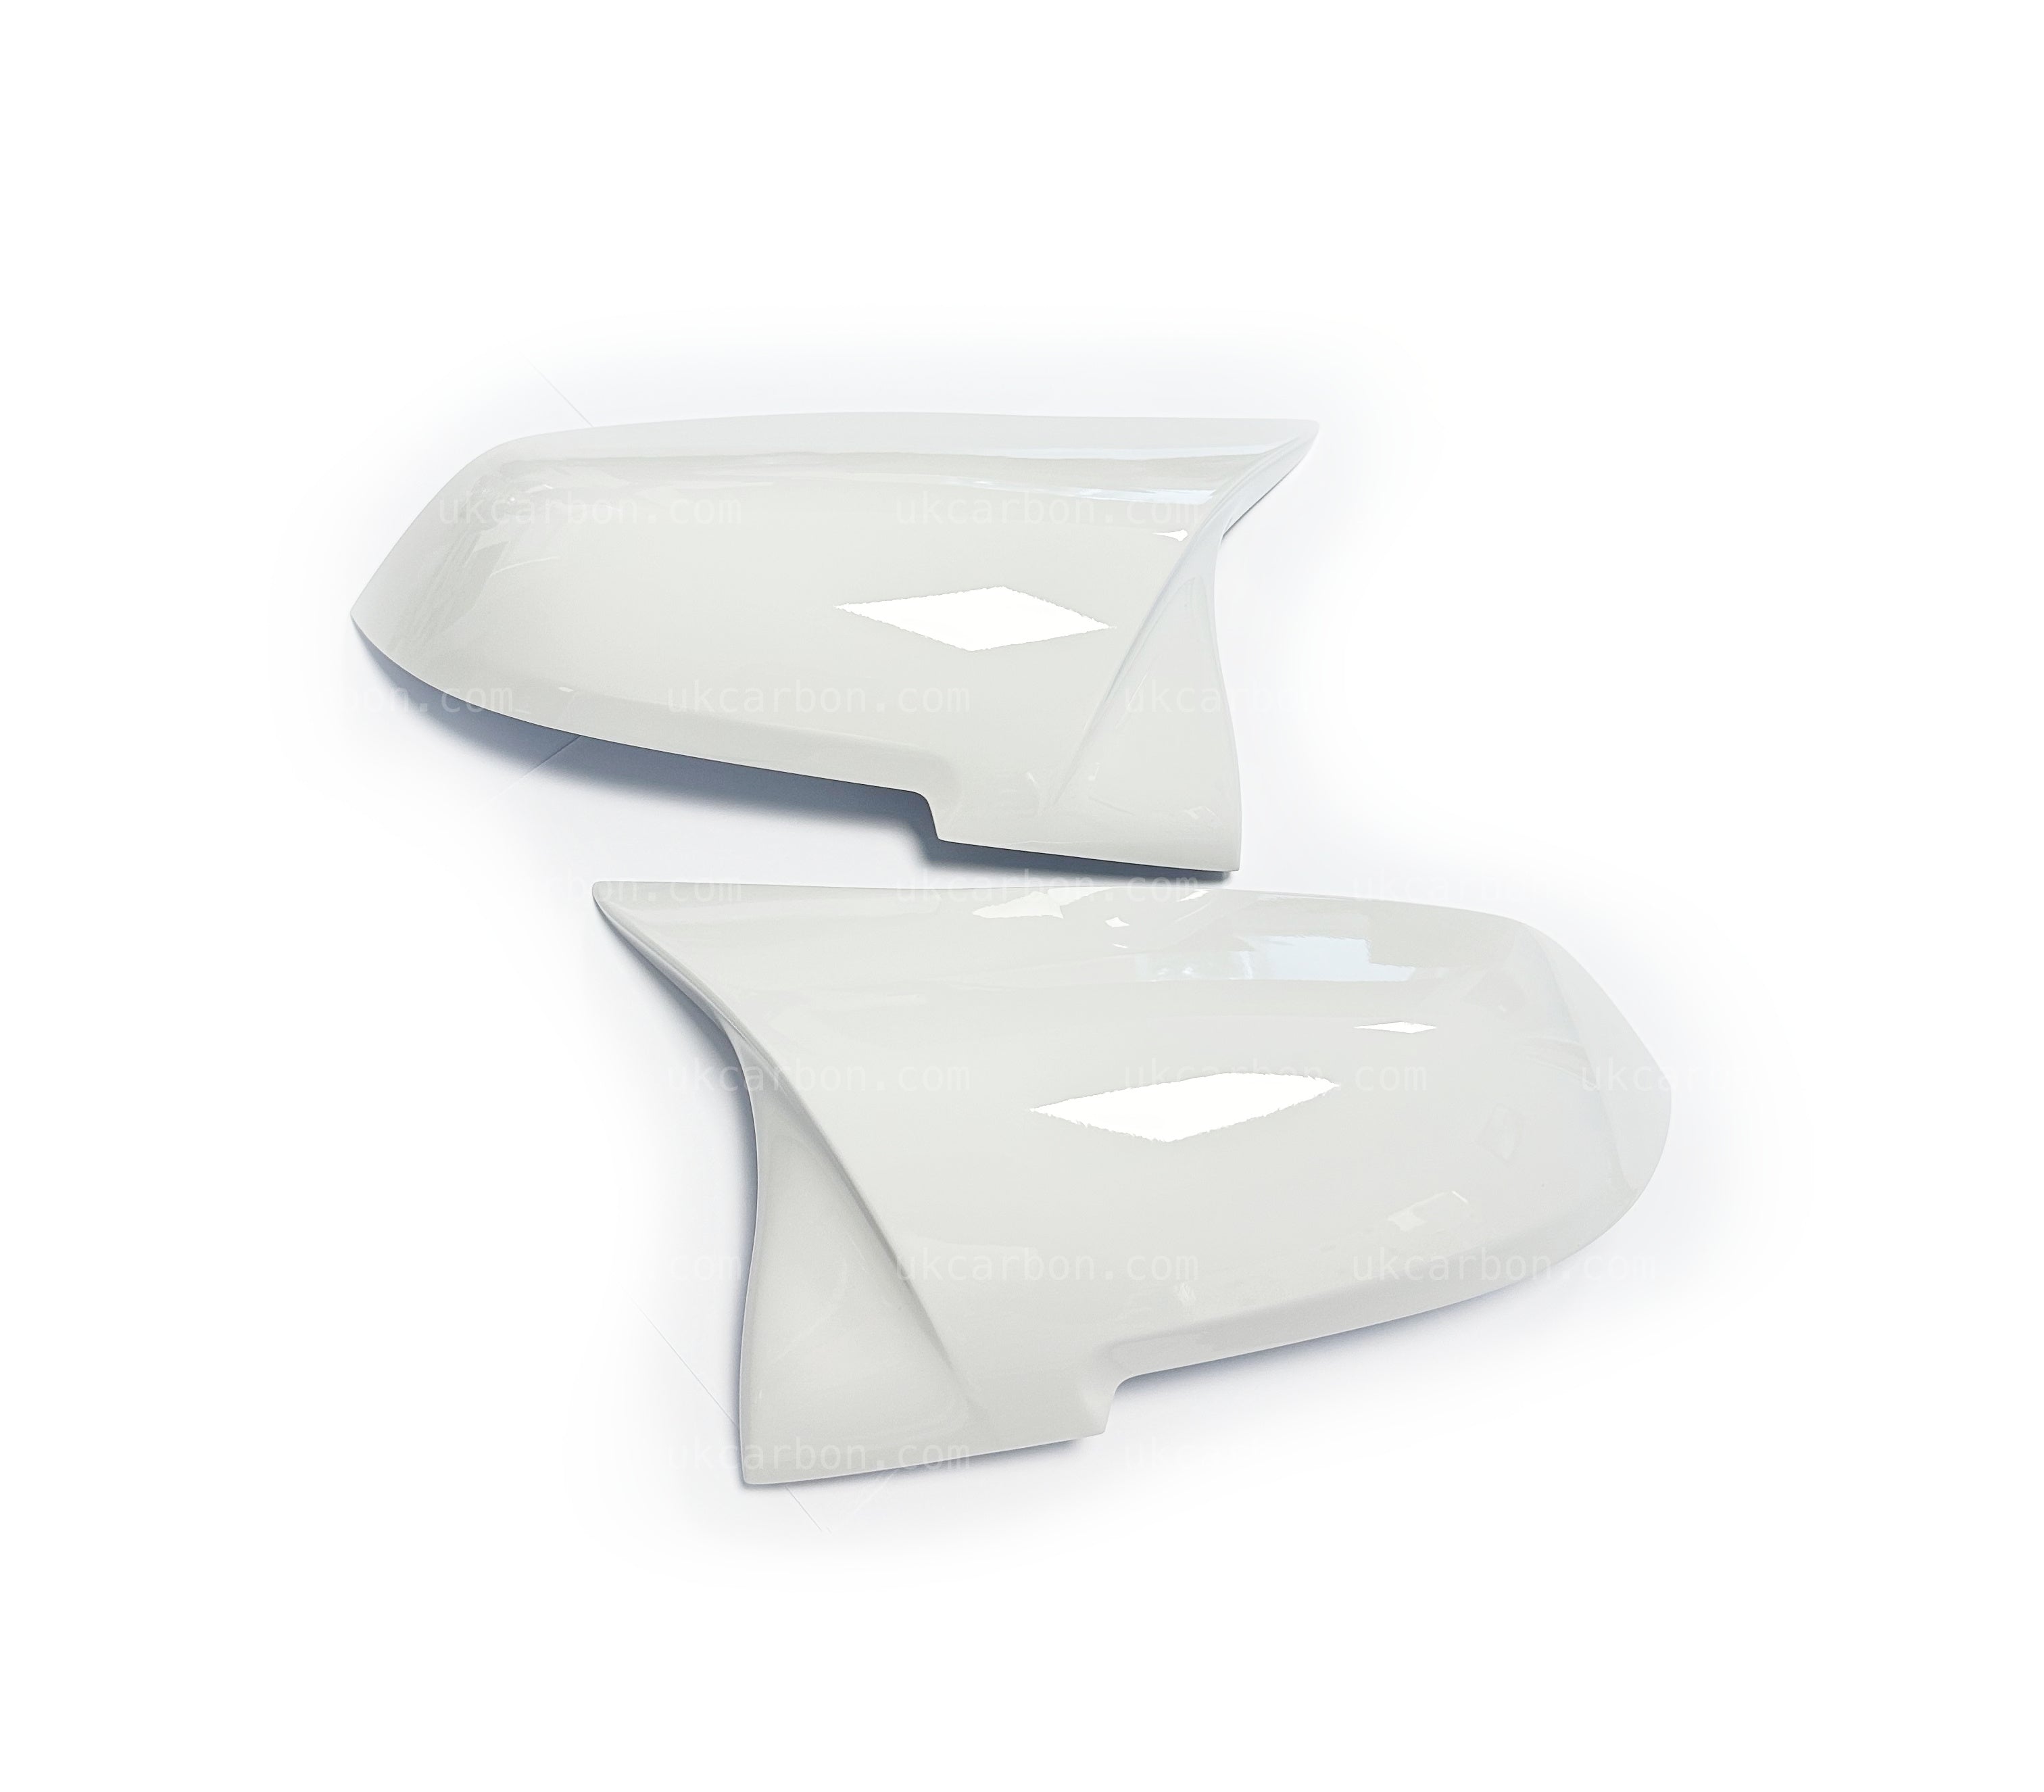 BMW 1 2 3 4 Series Alpine White 300 Wing Mirror Replacements Covers by UKCarbon